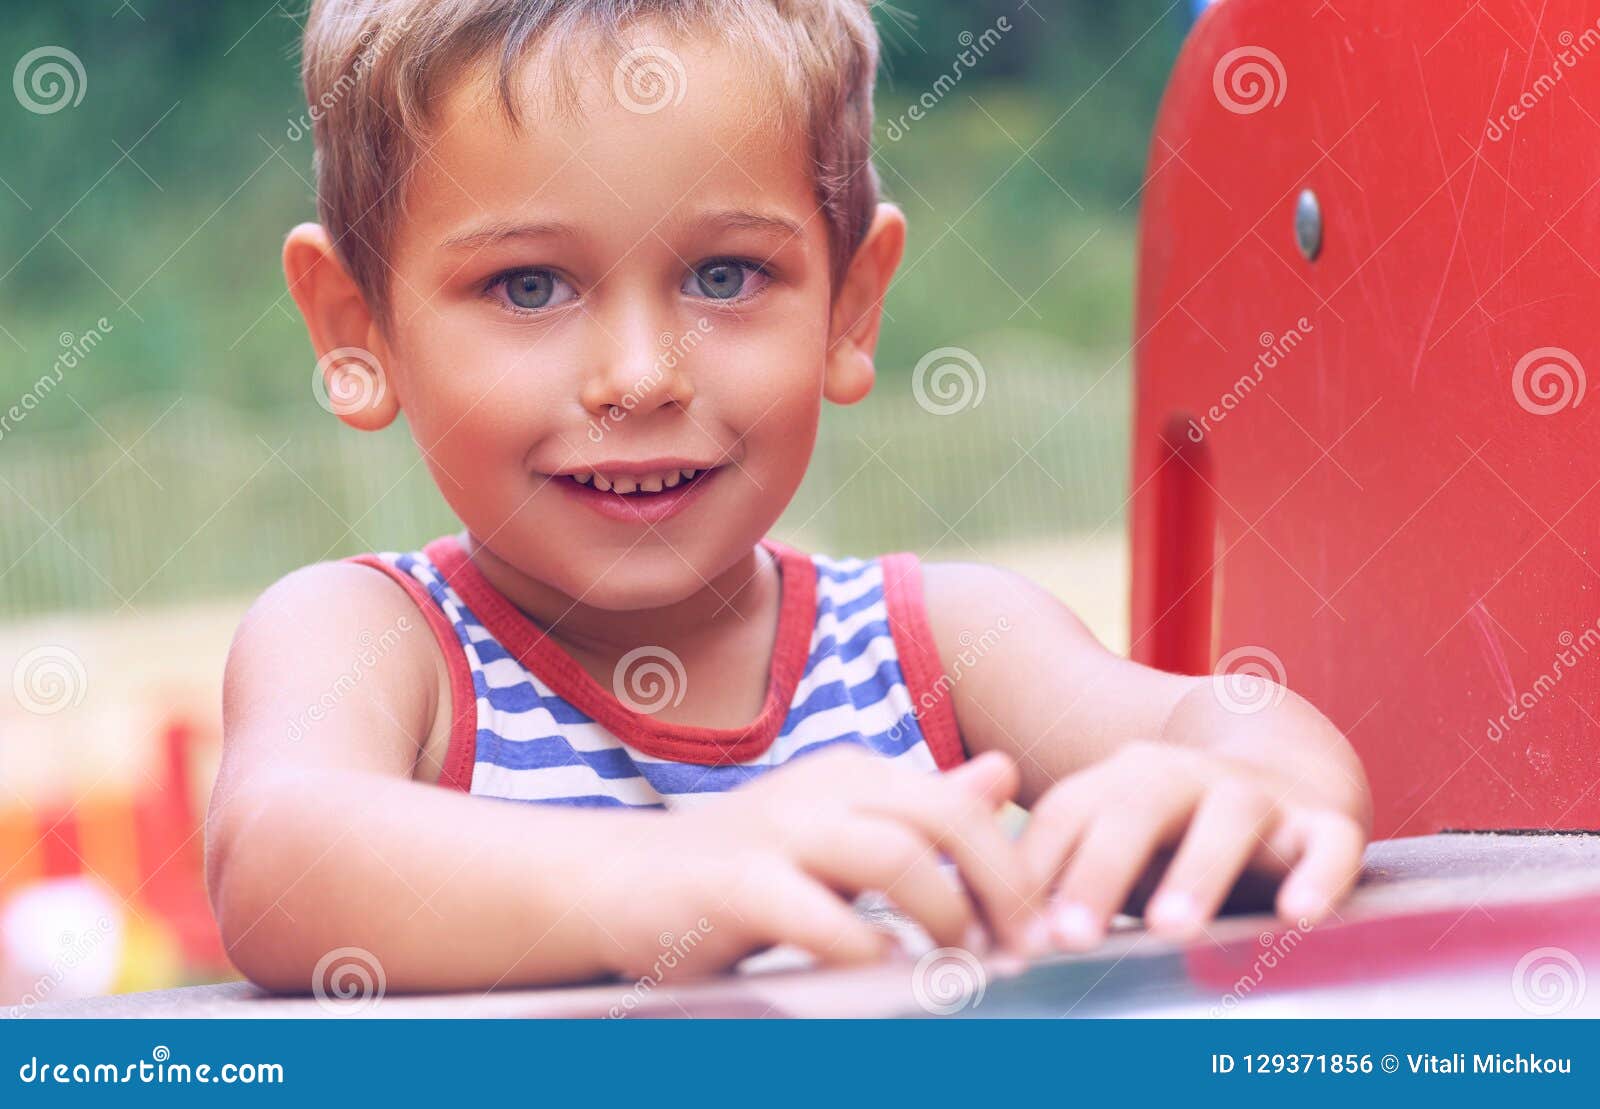 Little Toddler Boy in Striped T-shirt Having Fun on Playground on ...